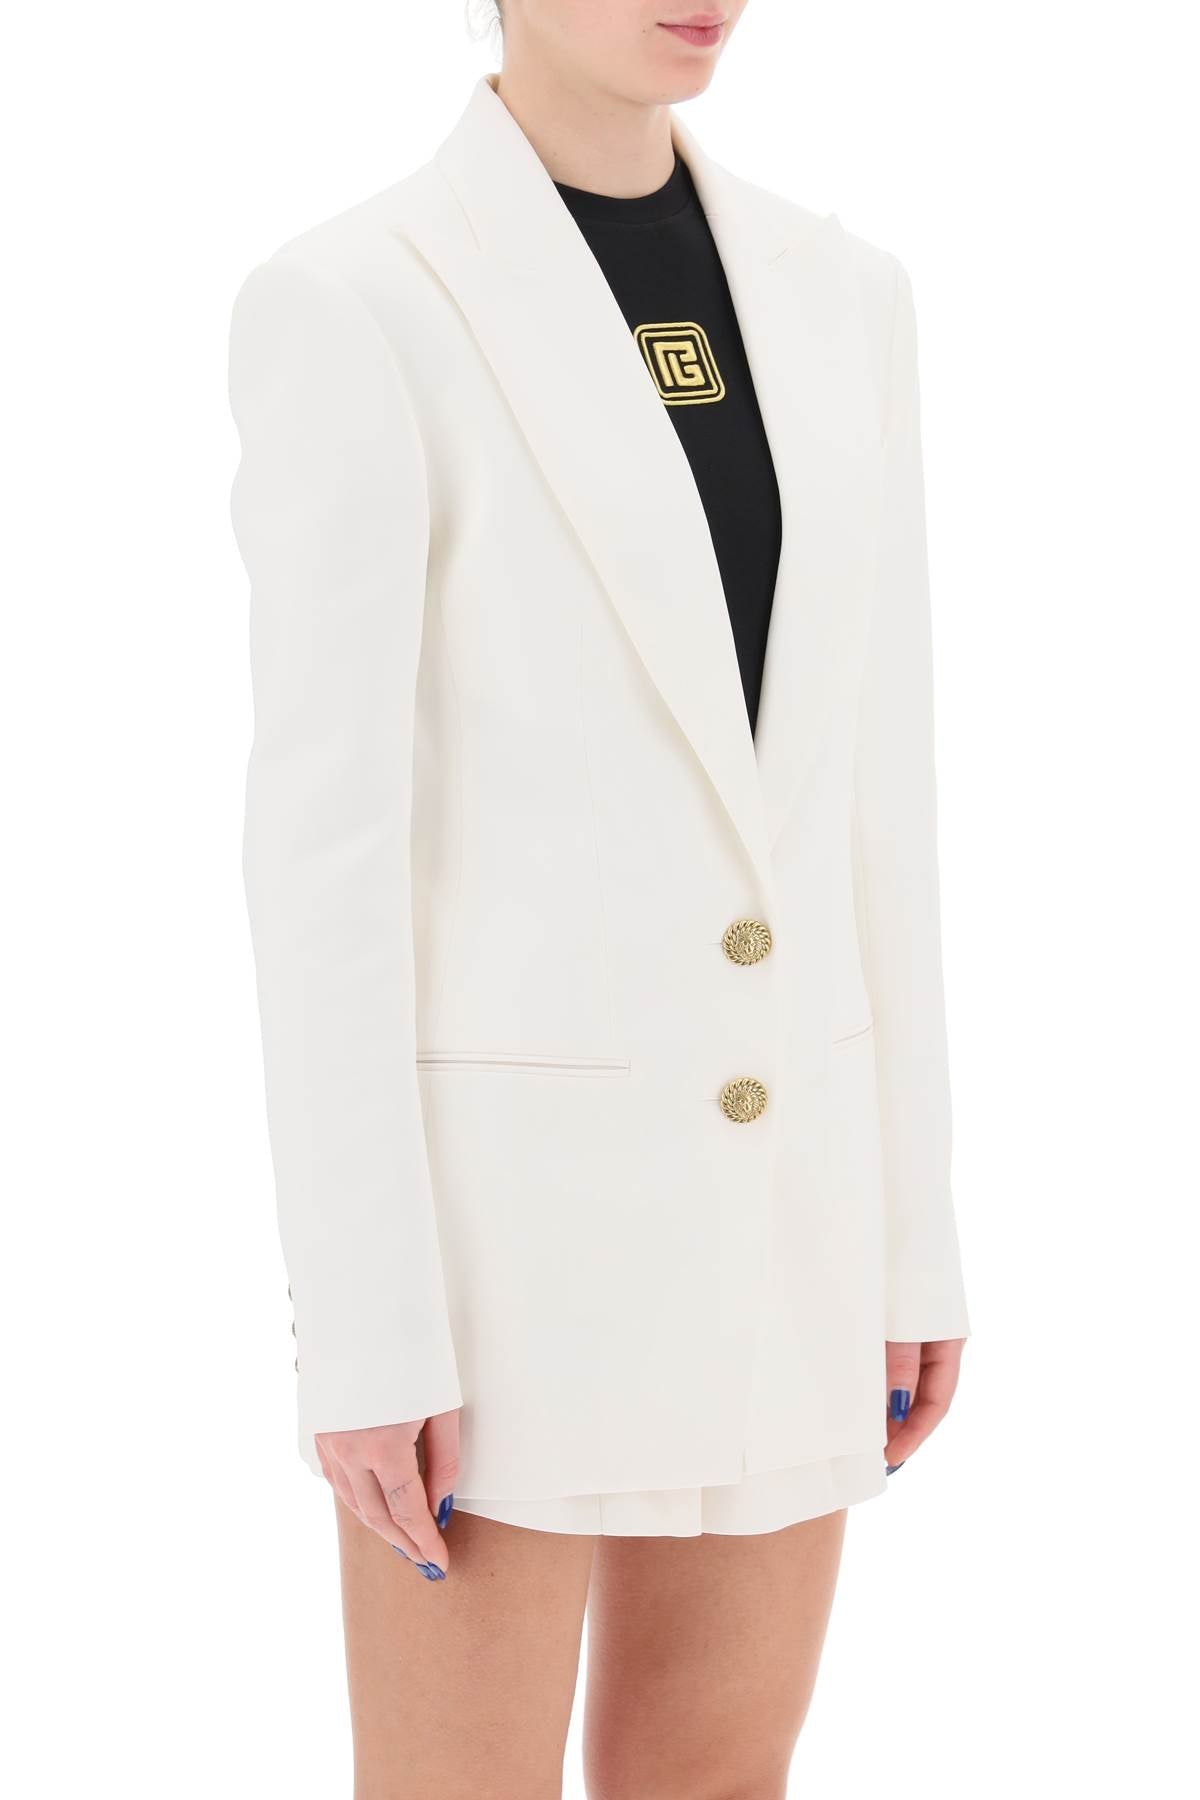 Balmain fitted single-breasted blazer